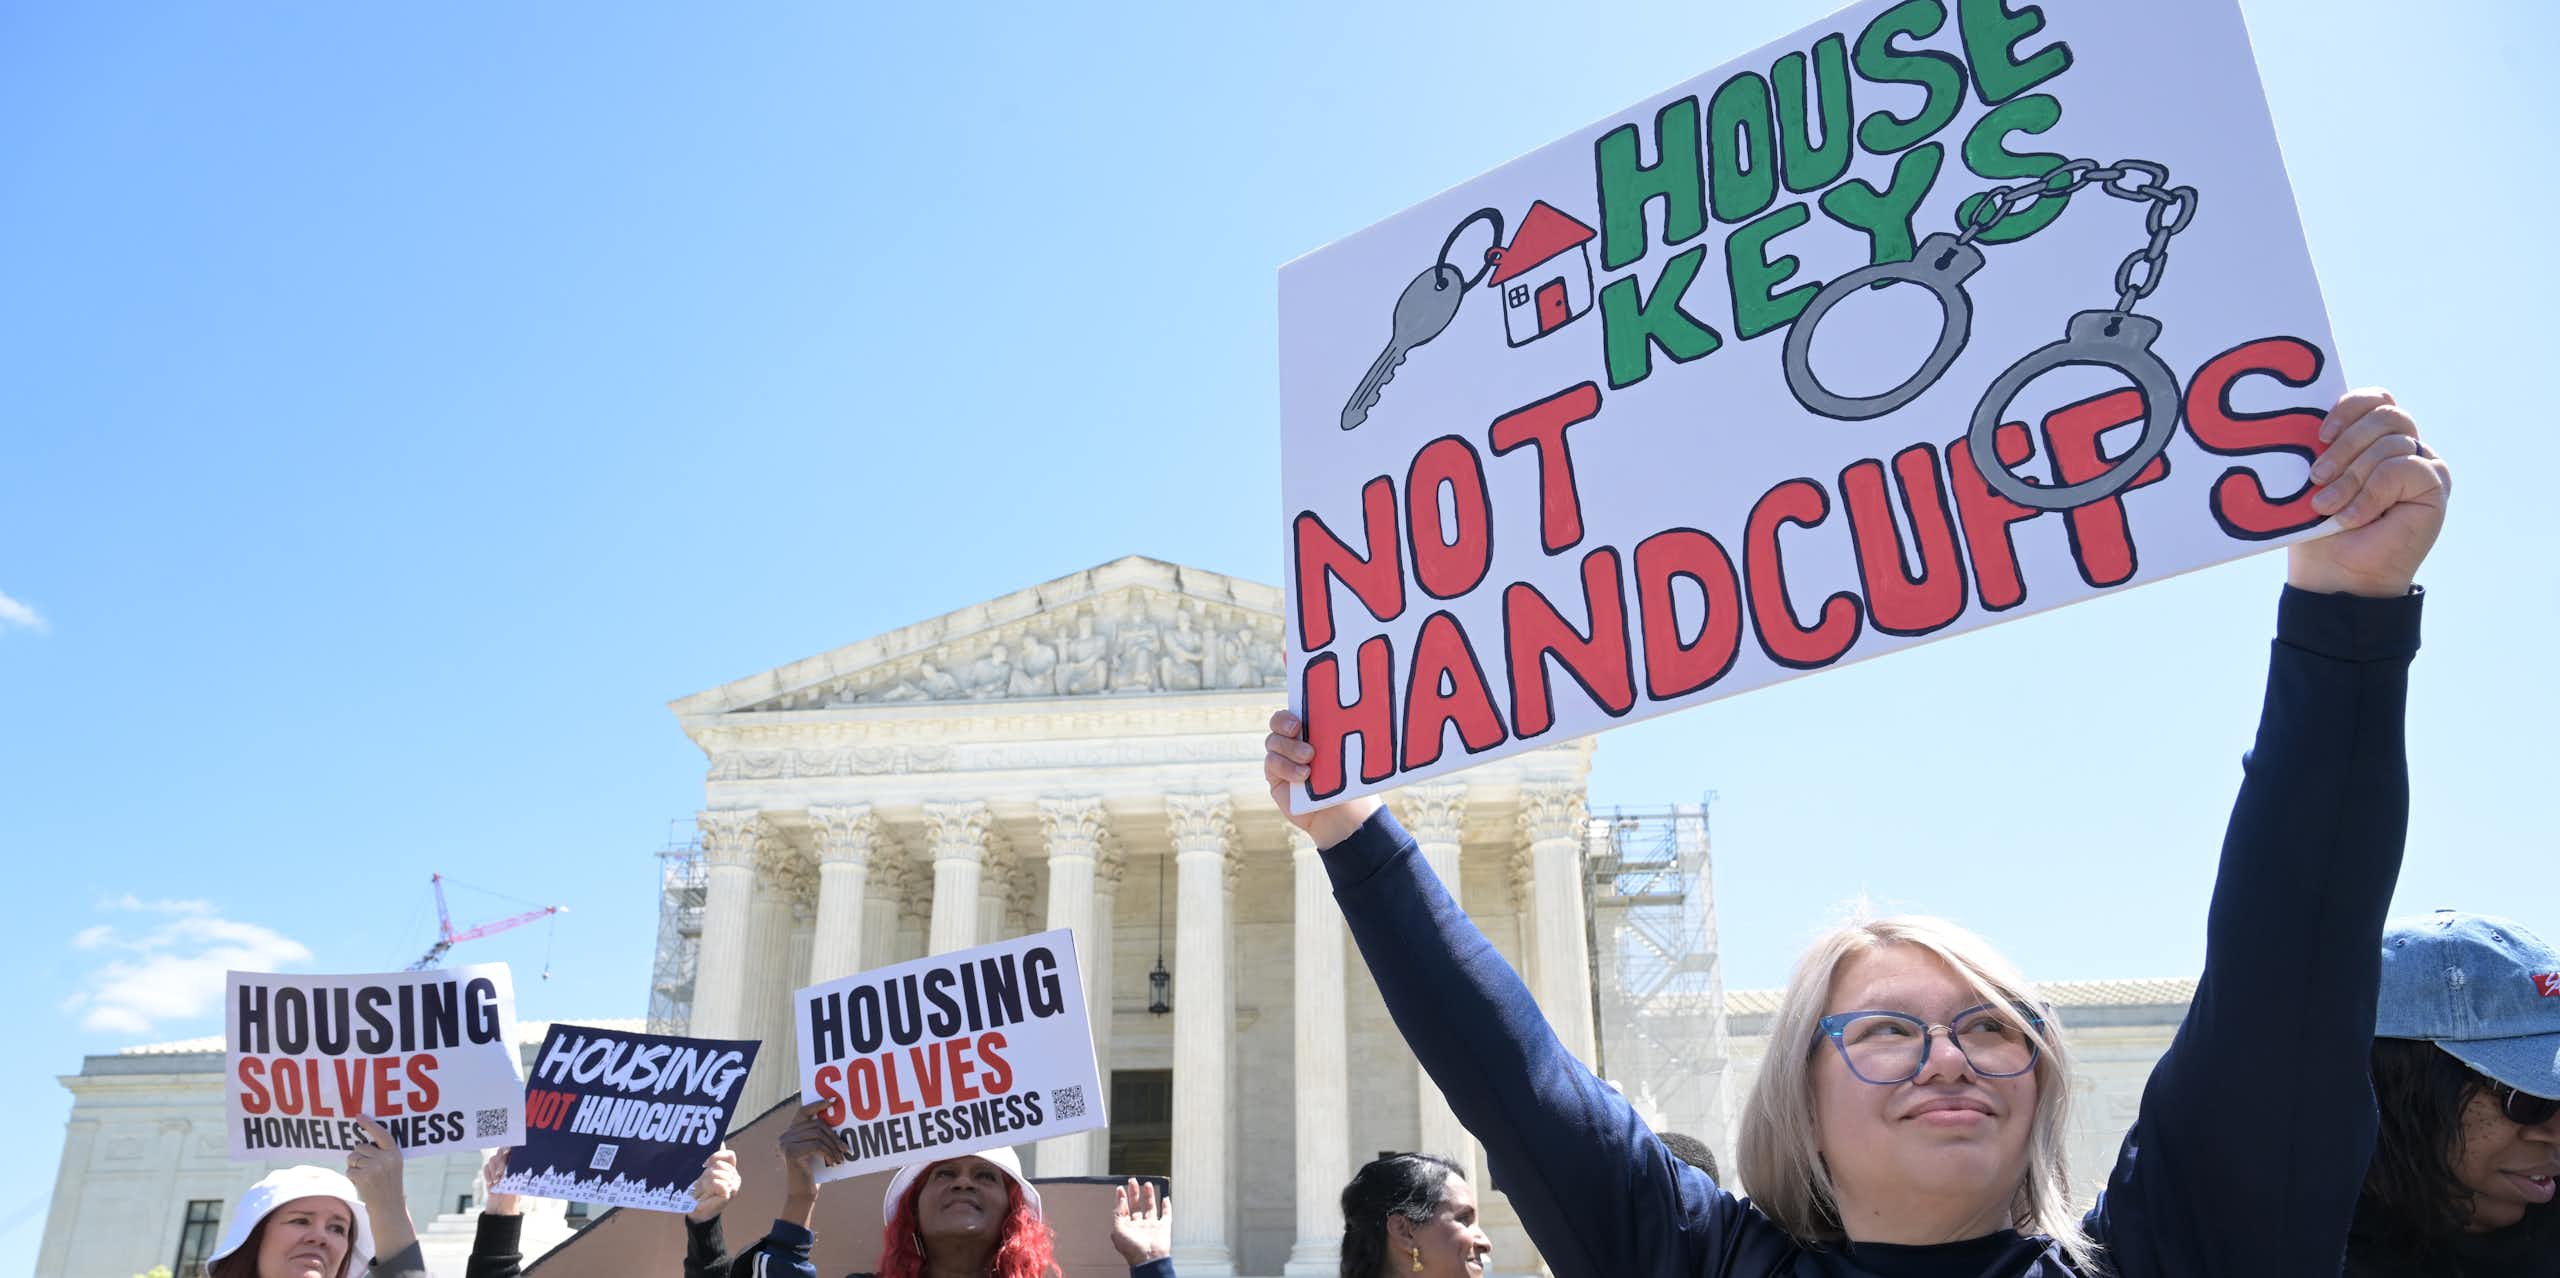 People hold signs reading 'House keys, not handcuffs' and 'Housing solves homelessness'